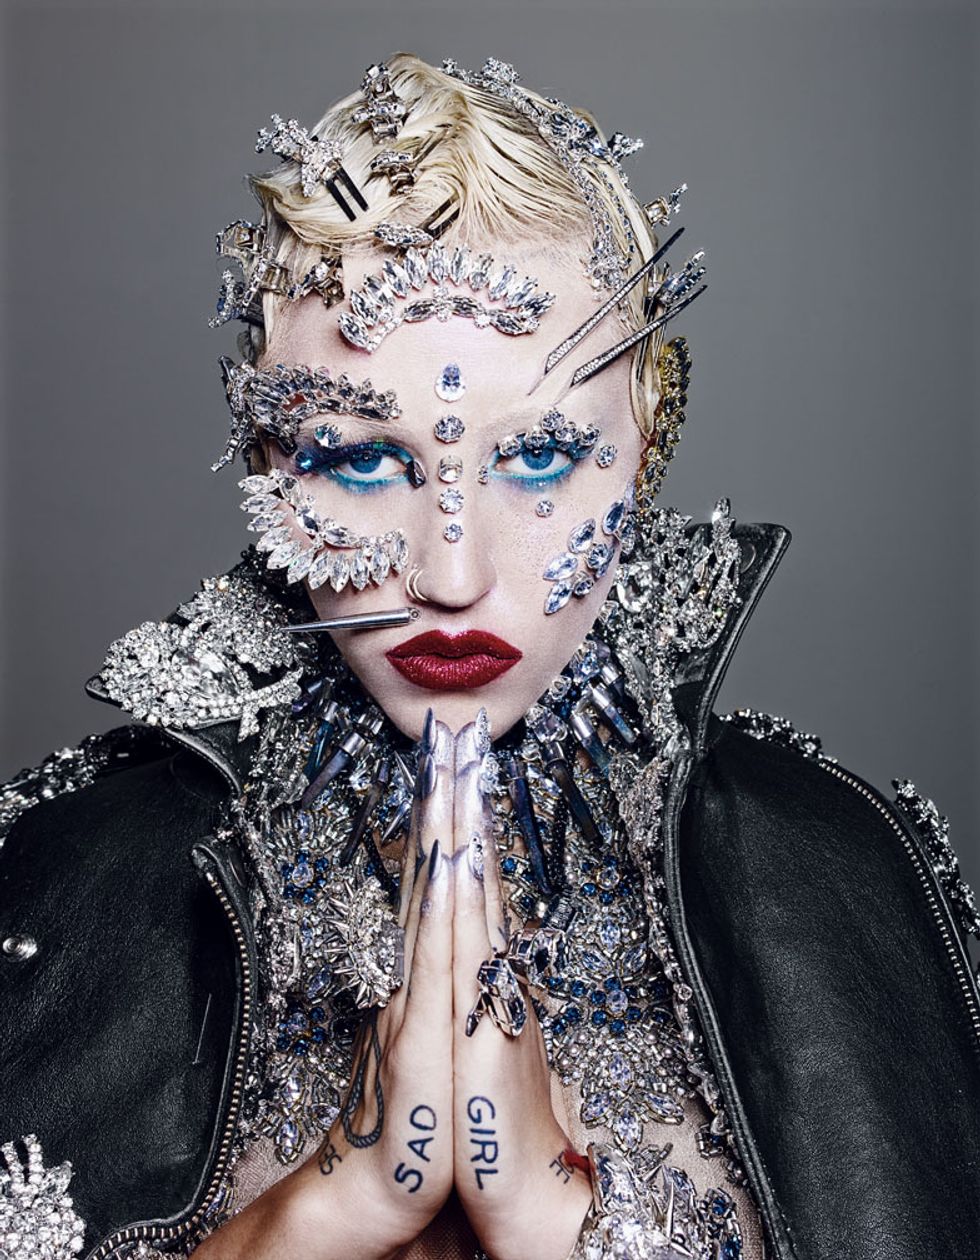 Welcome to the Feral, Freaky World of Brooke Candy